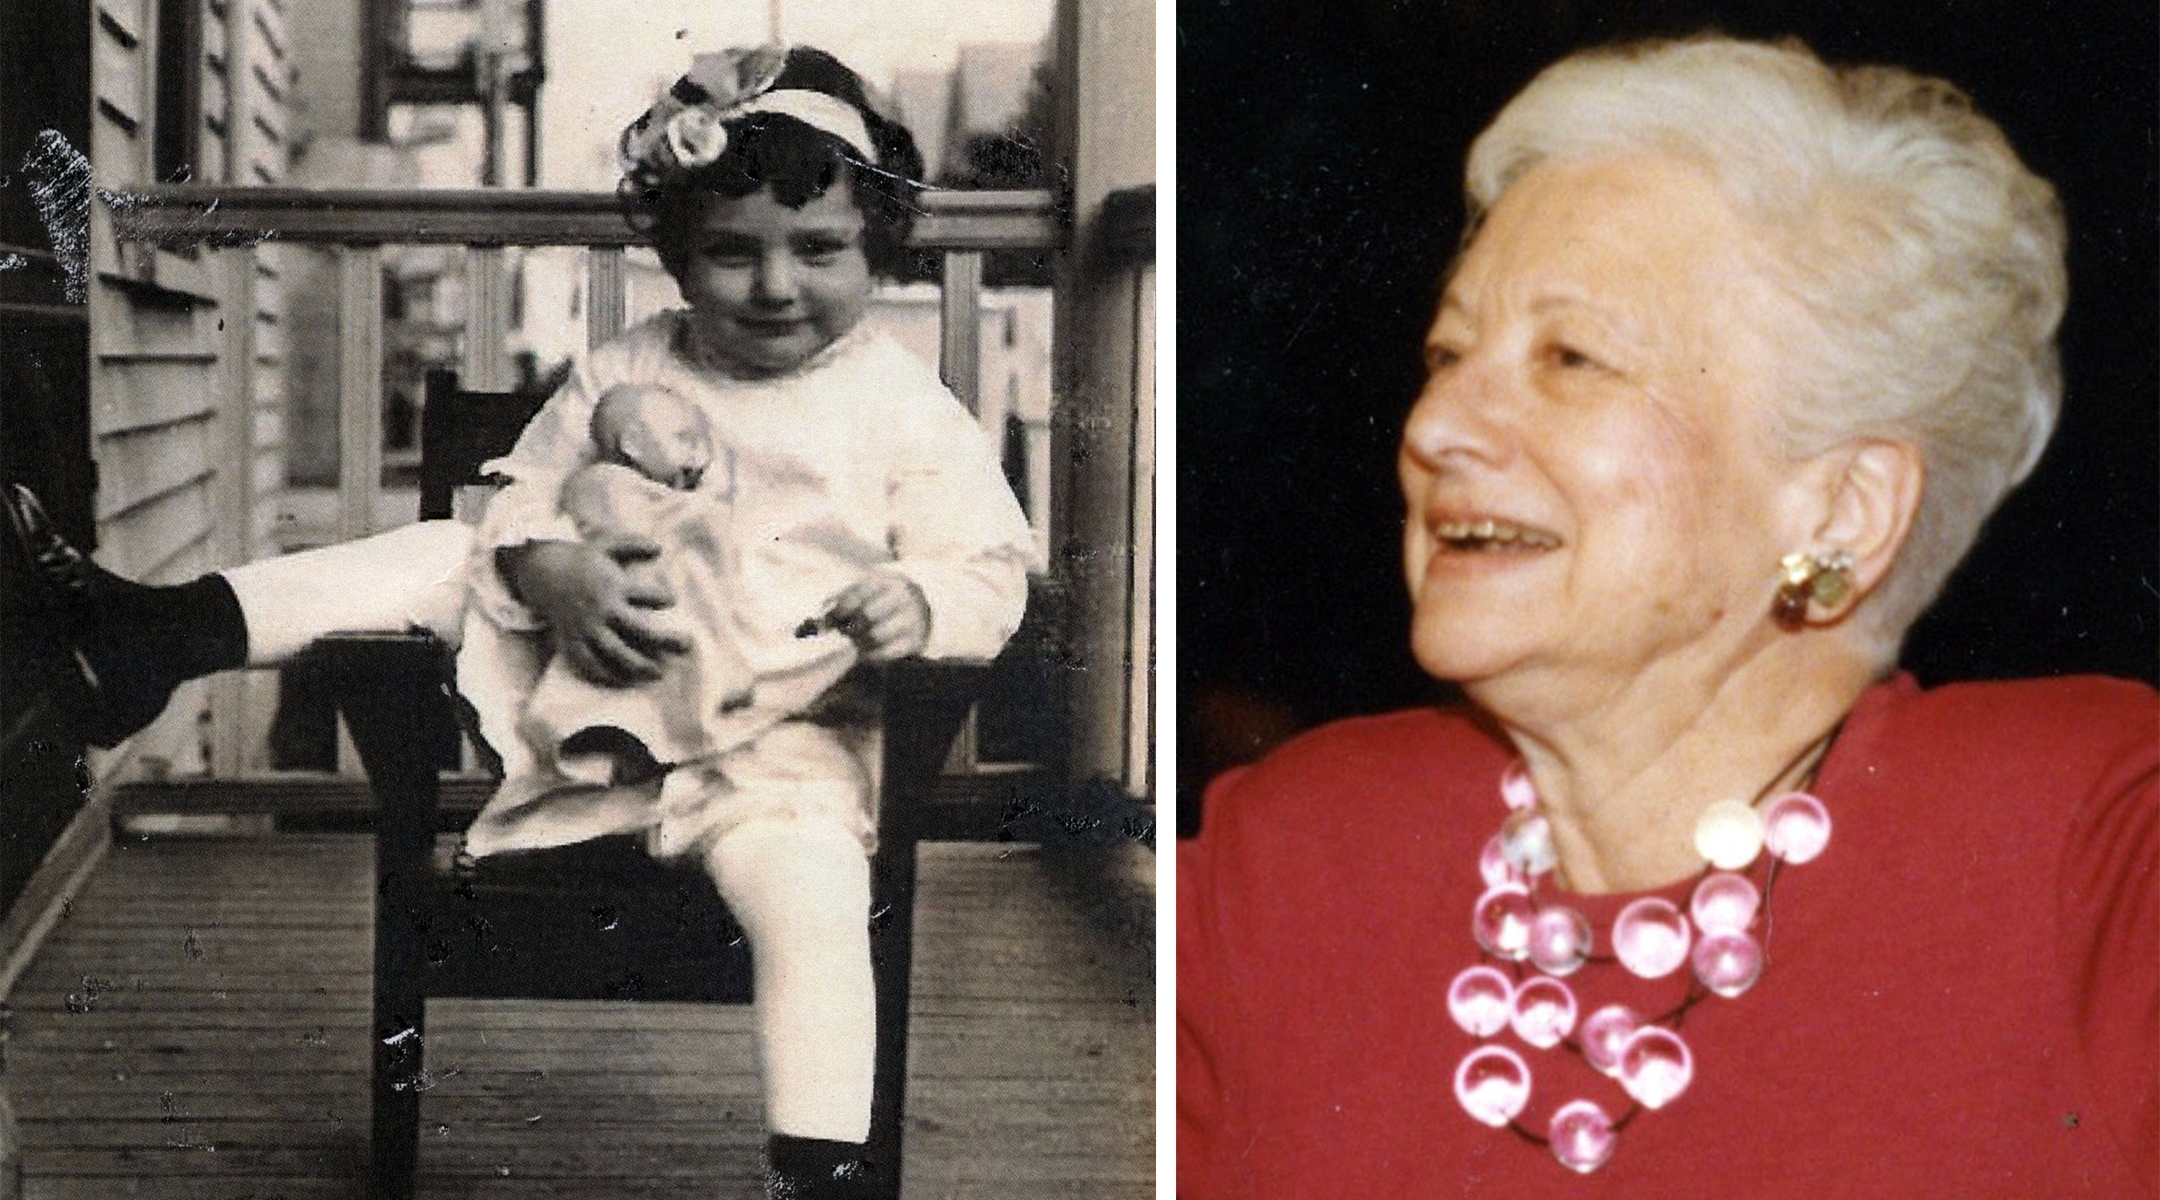 Louise Levy was born in 1910 and grew up in Cleveland and New York City; Levy often ascribed her longevity to a daily glass of red wine and a low-cholesterol diet. (Photos courtesy Levy family, via Fox Funeral Home)